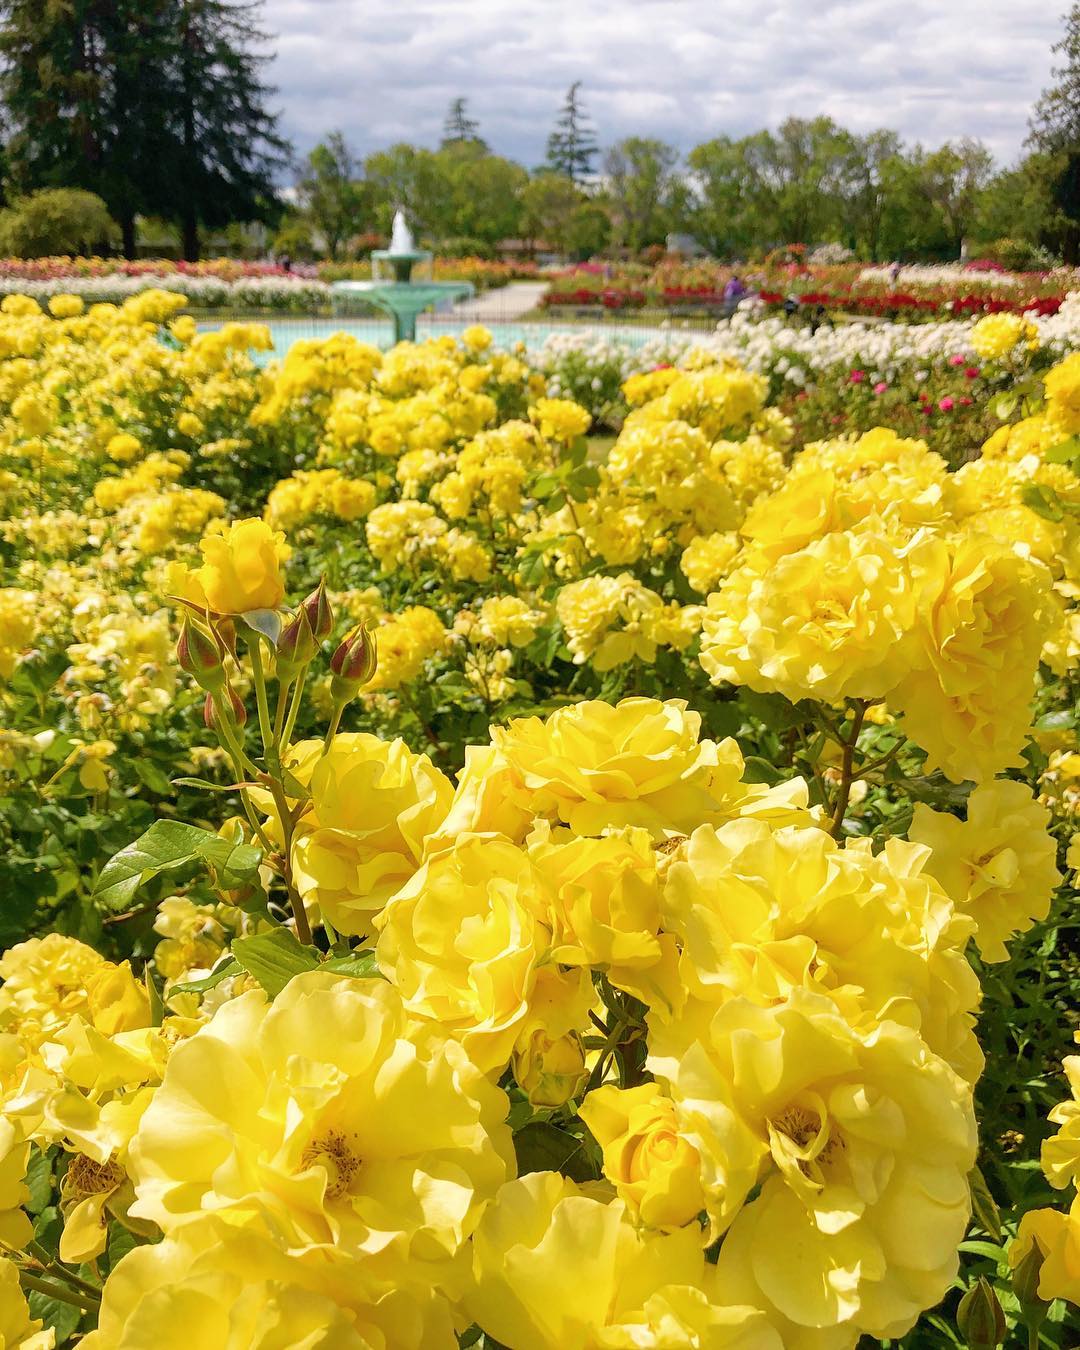 Closeup of blooming yellow flowers with a fountain and trees in the background. Photo by Instagram user @visitsanjose